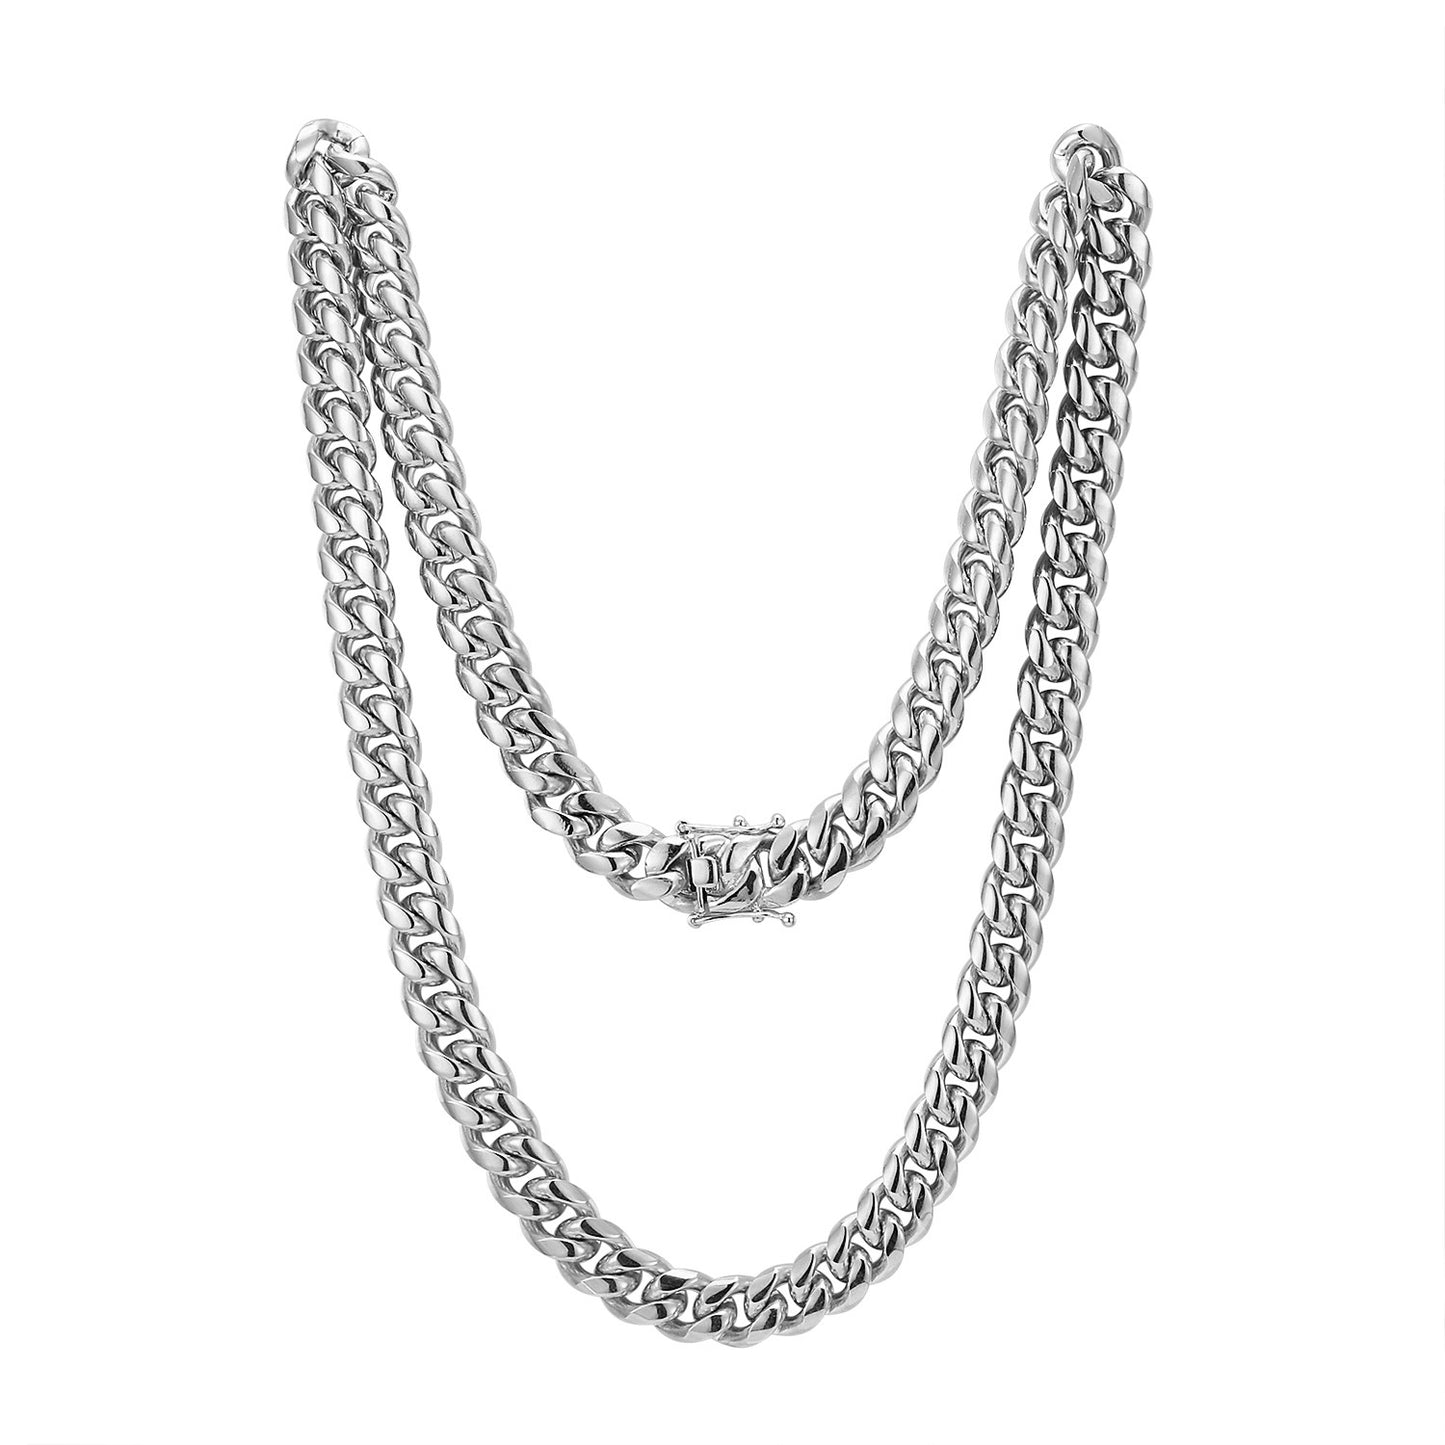 Stainless Steel 12mm Miami Cuban Link 14k White Gold Finish Chain 24" Plain Designer Necklace